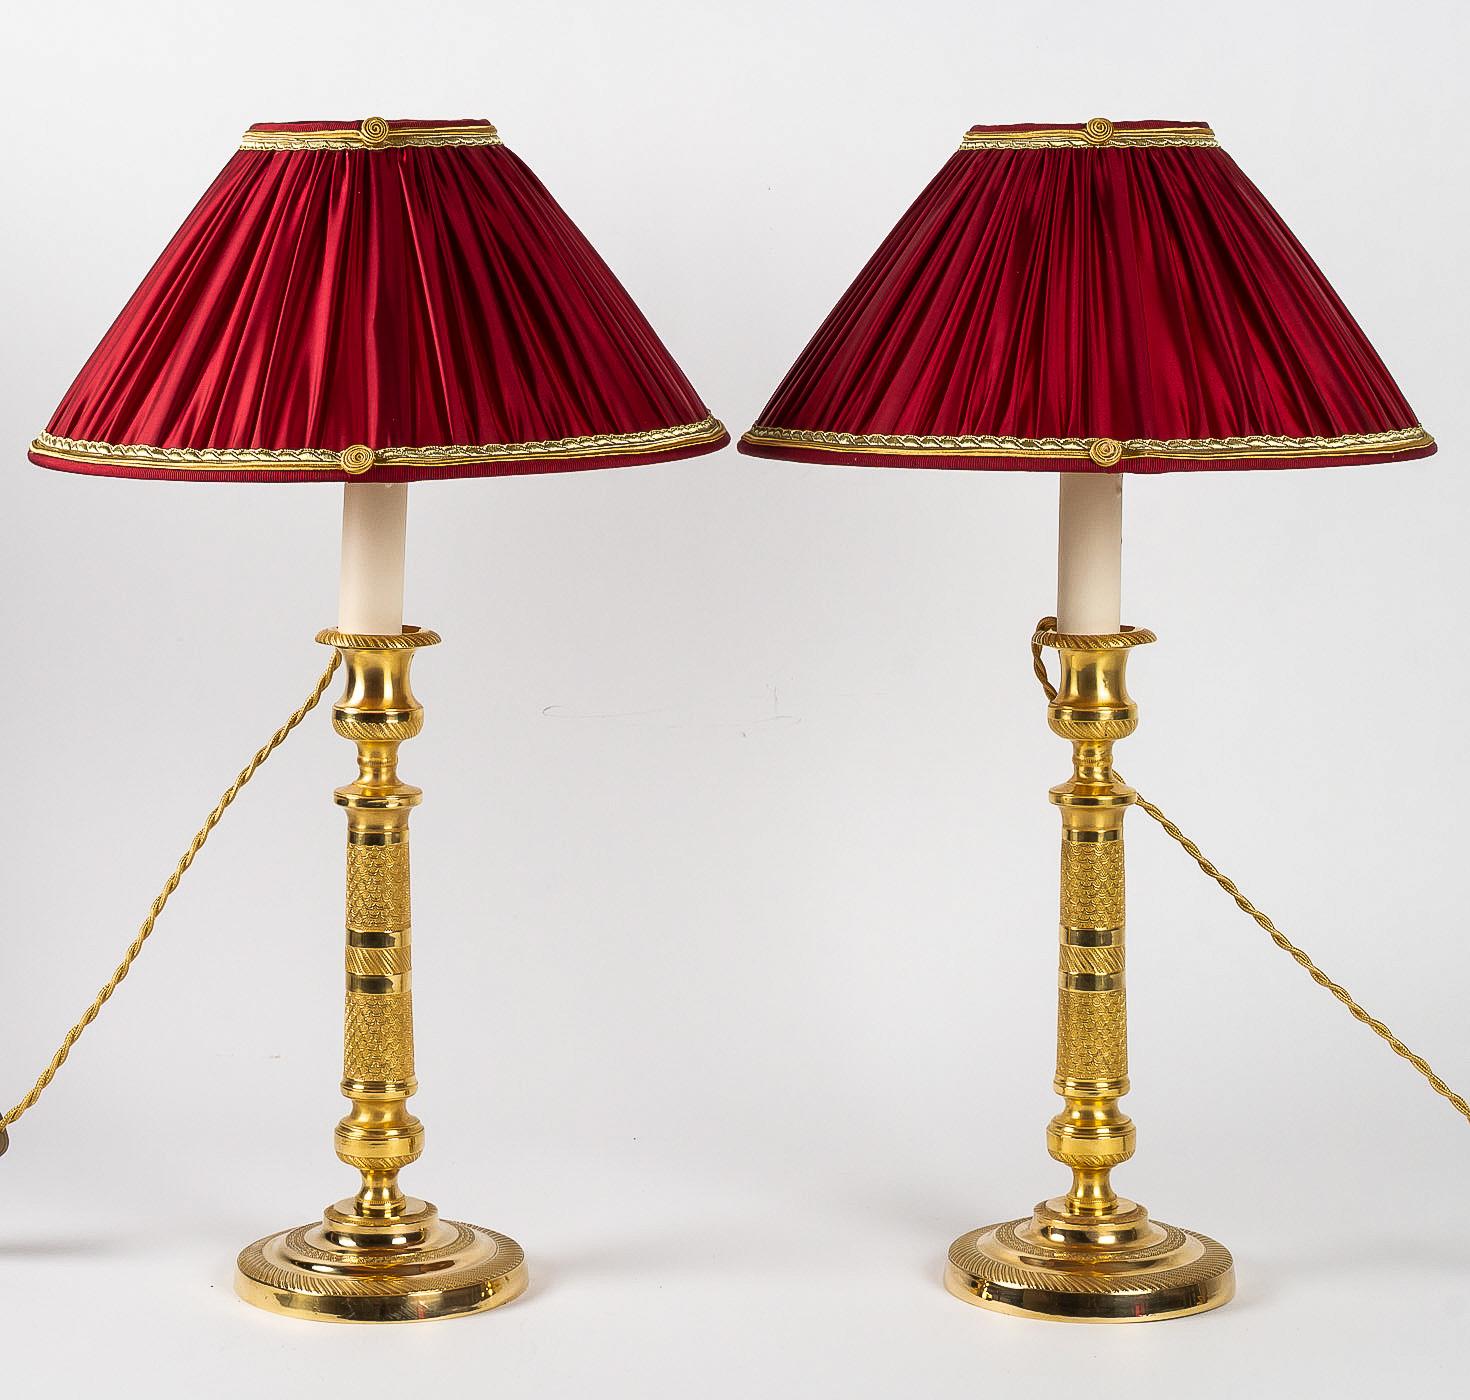 French Empire Period, Pair of Chiseled Ormolu Candlesticks Converted in Table Lamps Circa 1805-1810.

An elegant and decorative pair of French Empire period gilt bronze candlesticks, finely chiseled of fish scales and pearls.

Our candlesticks